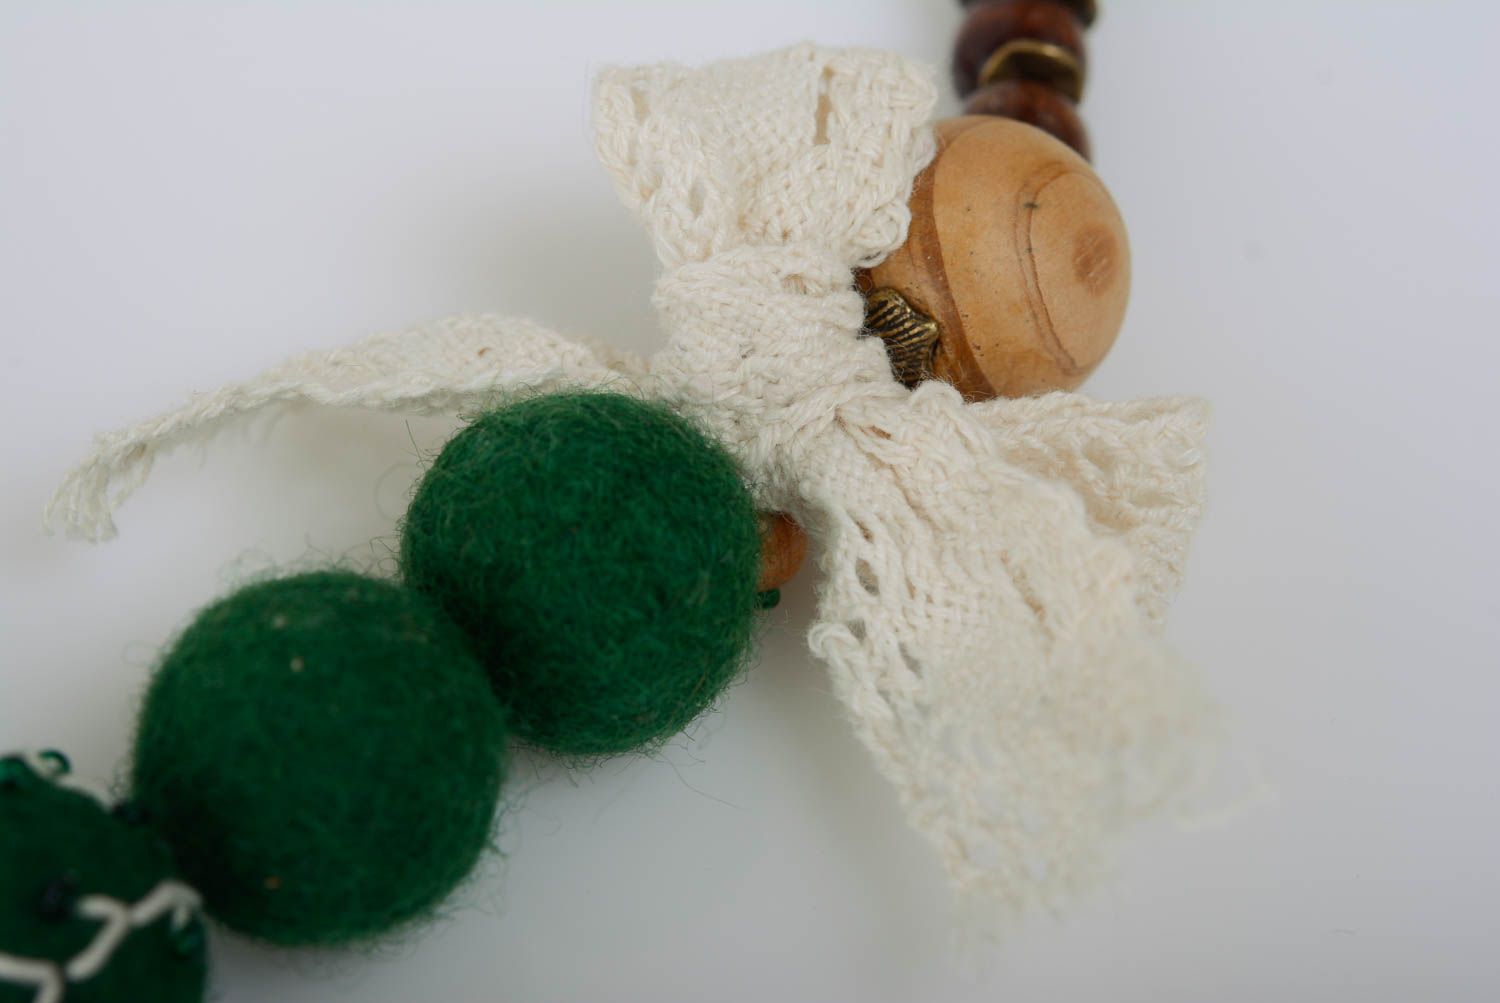 Handmade necklace on chain with green felted wool and wooden beads with lace photo 2